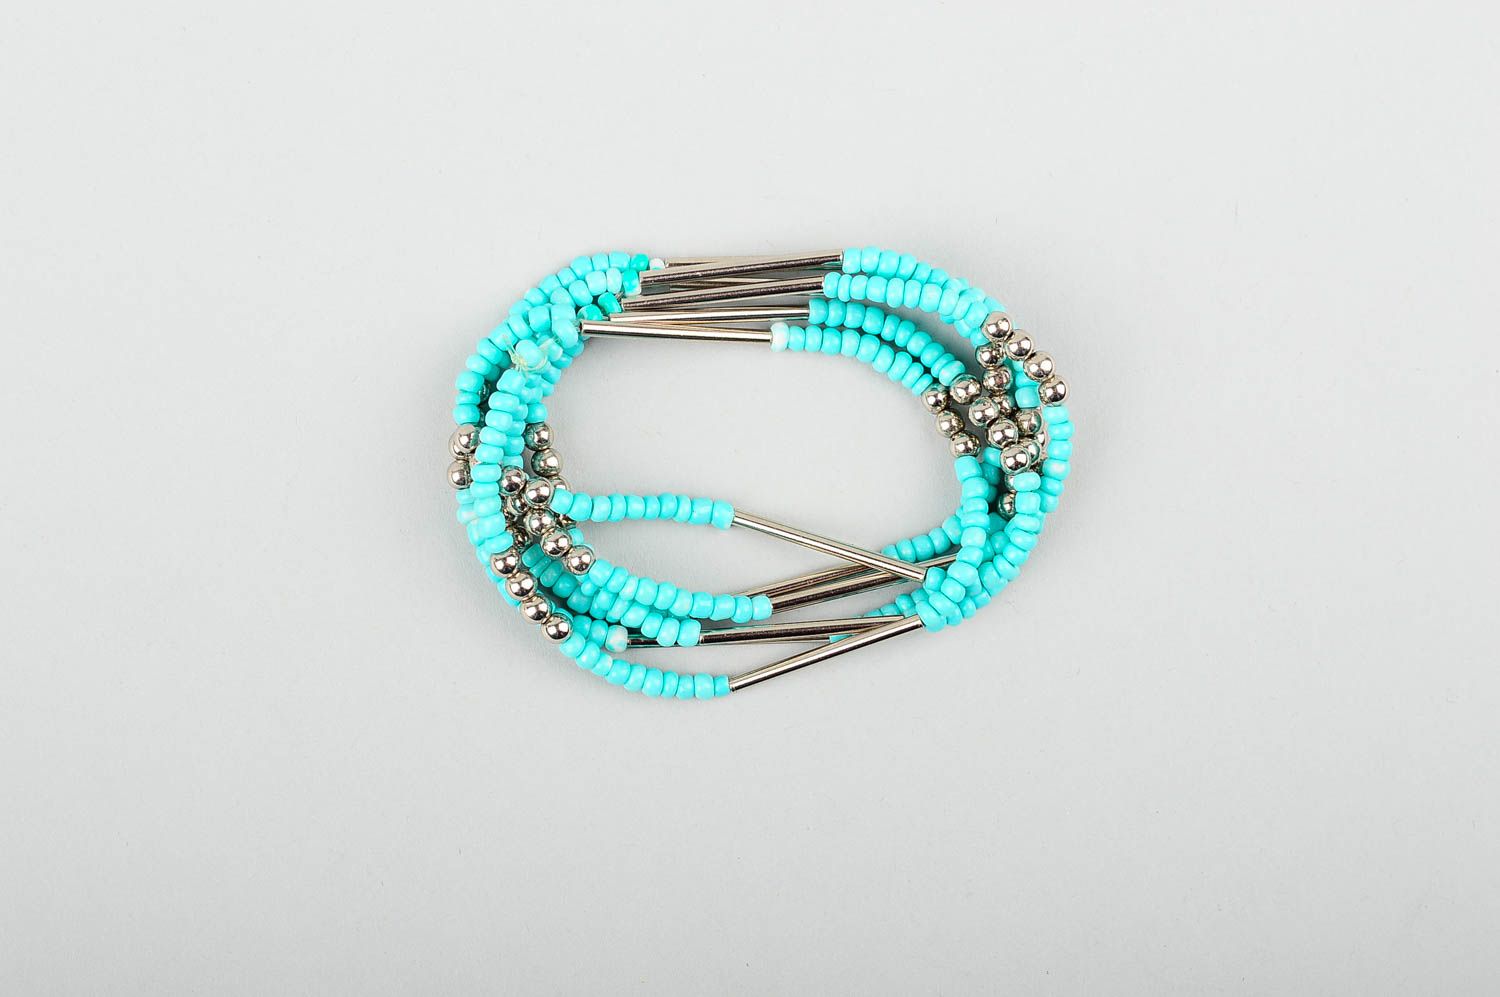 Five-layers wrist charm turquoise beaded bracelet with metal inserts for women photo 1